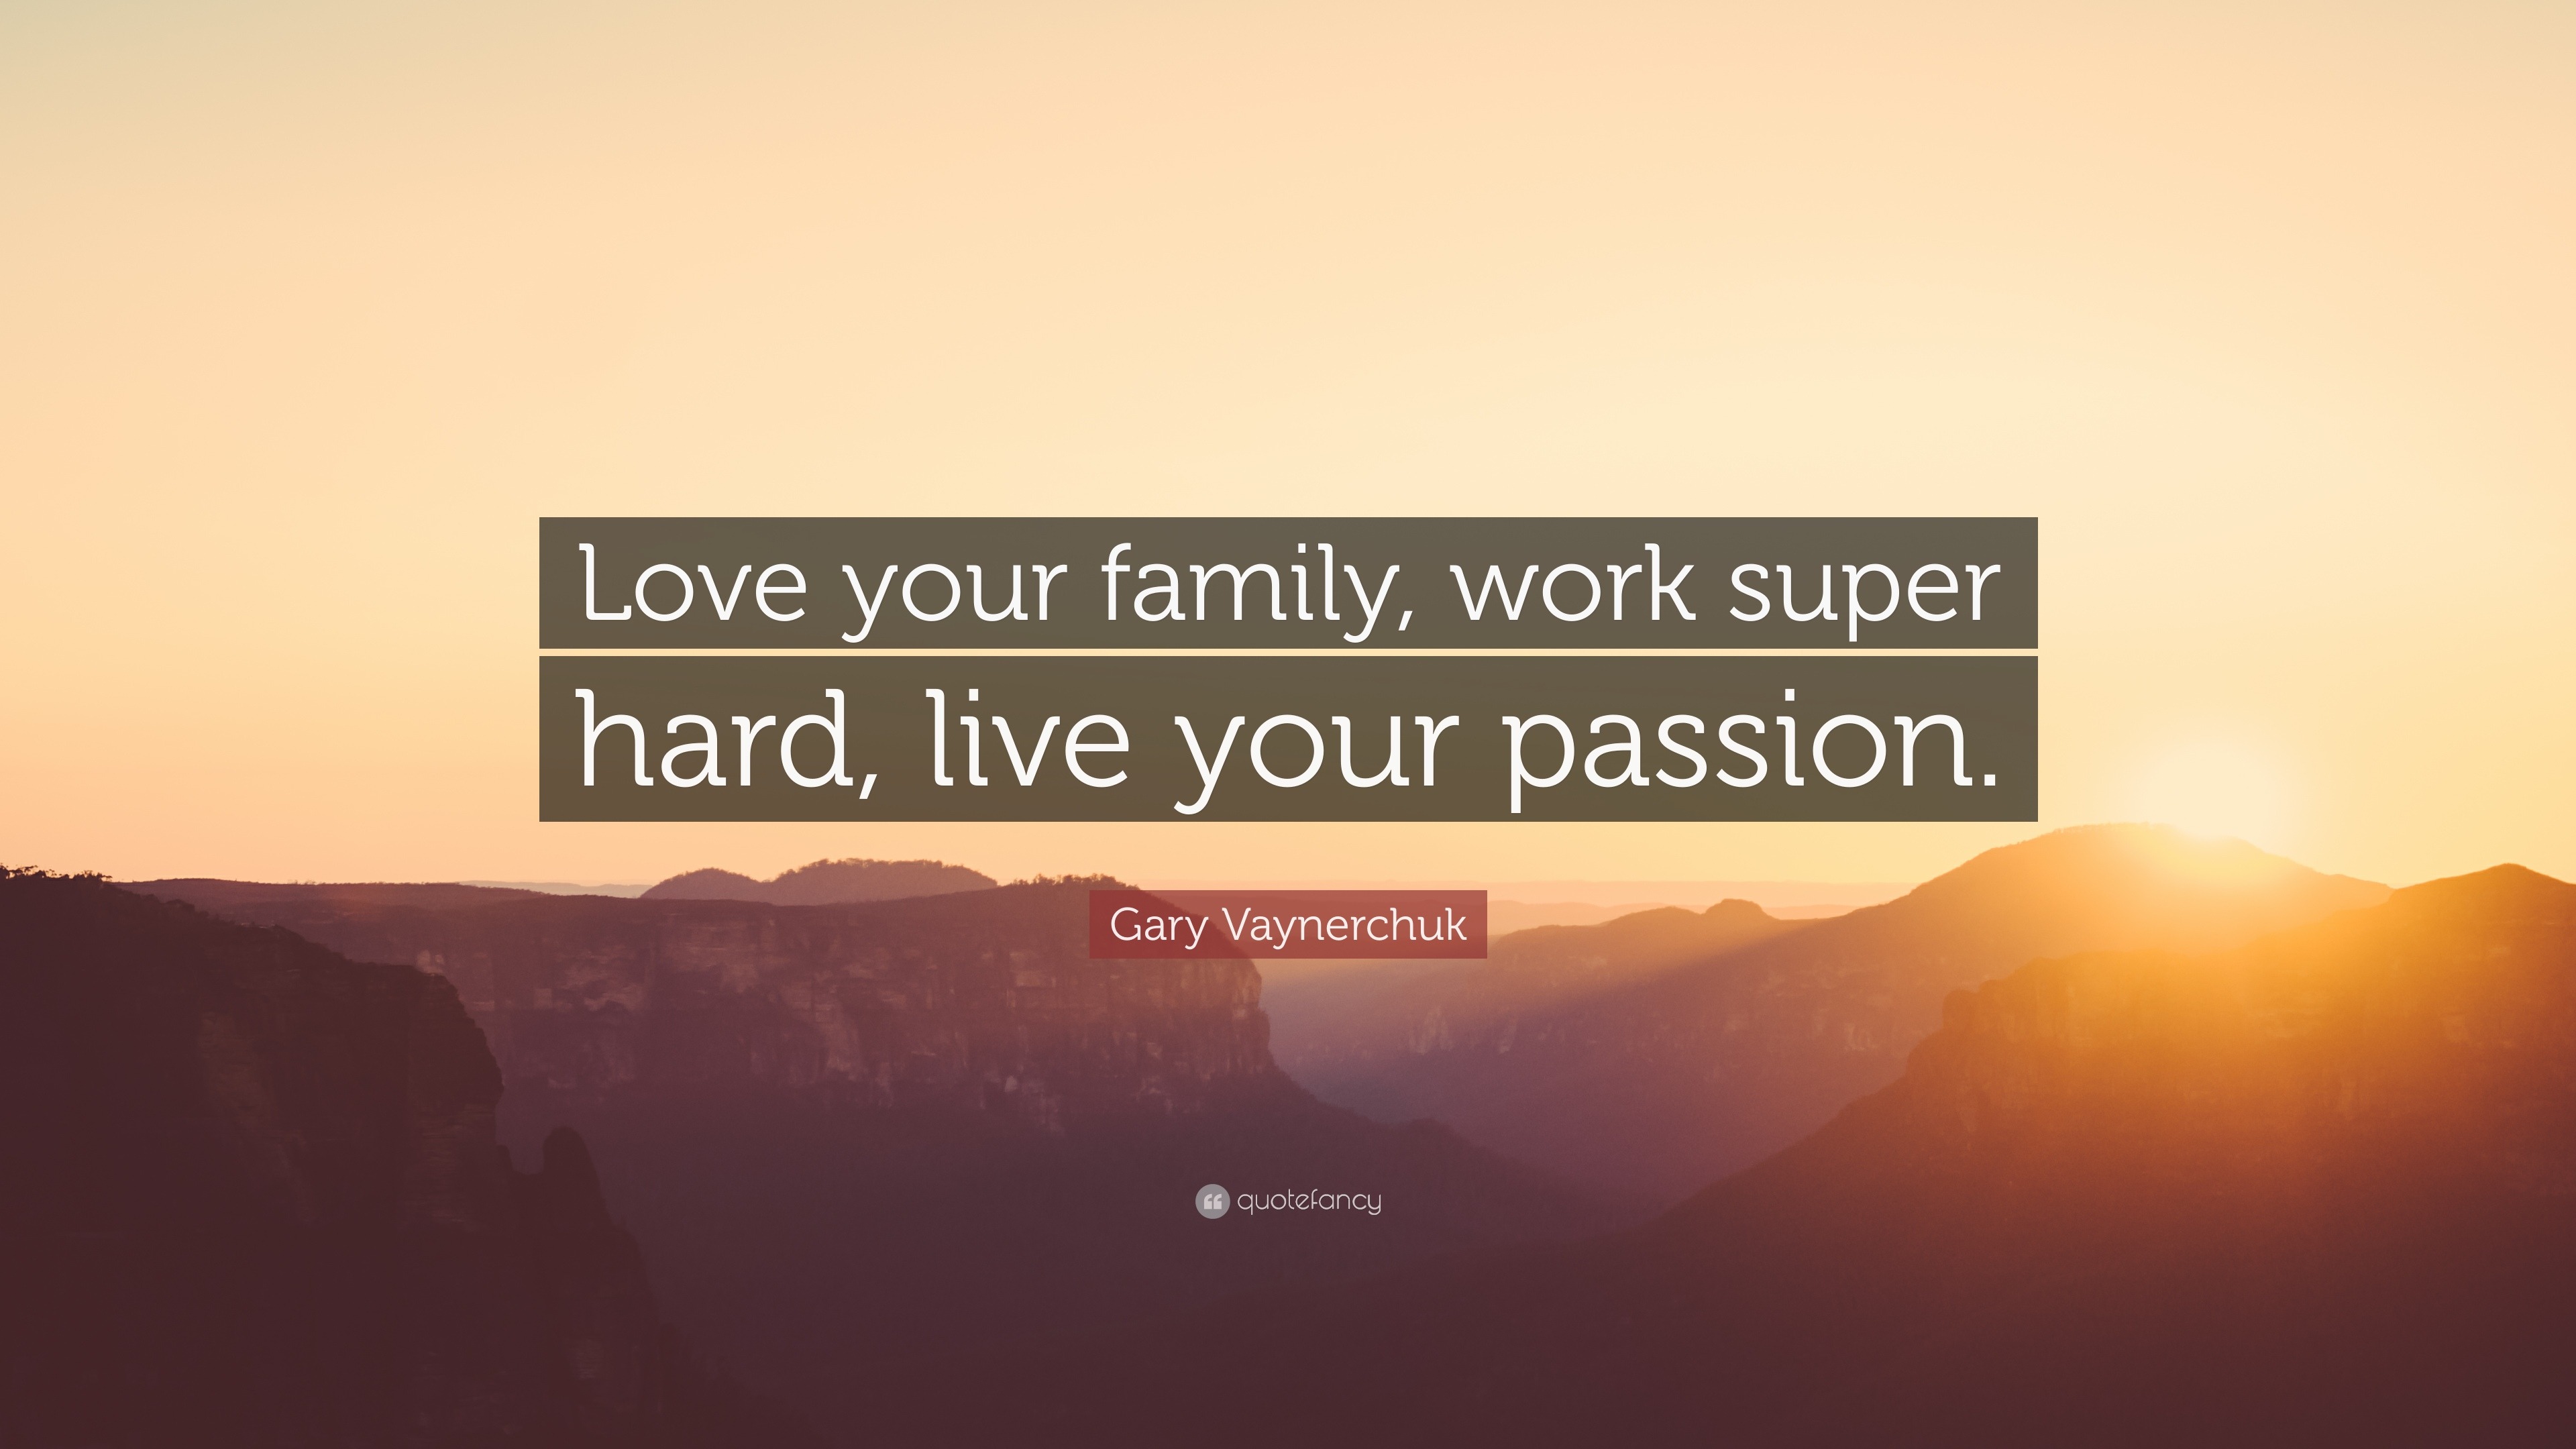 Love You Quotes “Love your family work super hard live your passion